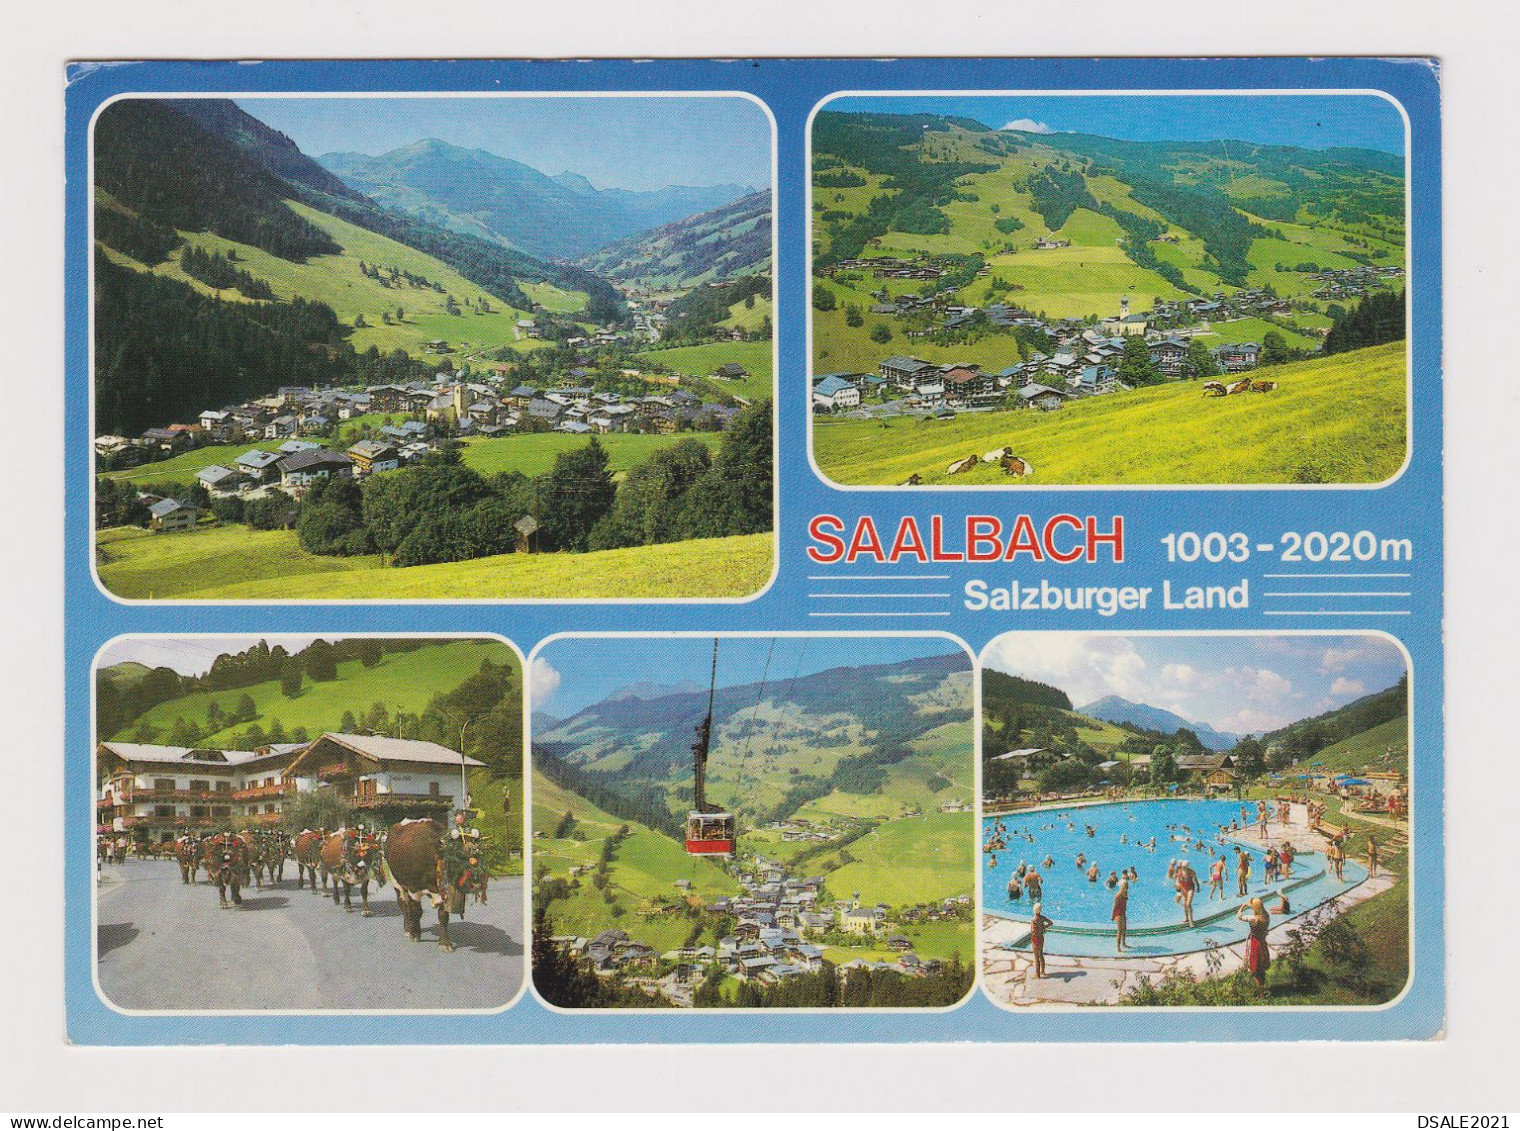 Austria Österreich RPPc 1990s W/Topic Stamp Coinage, Coining, Coin Production, Münzprägung, Saalbach 1003m. View /67970 - Coins